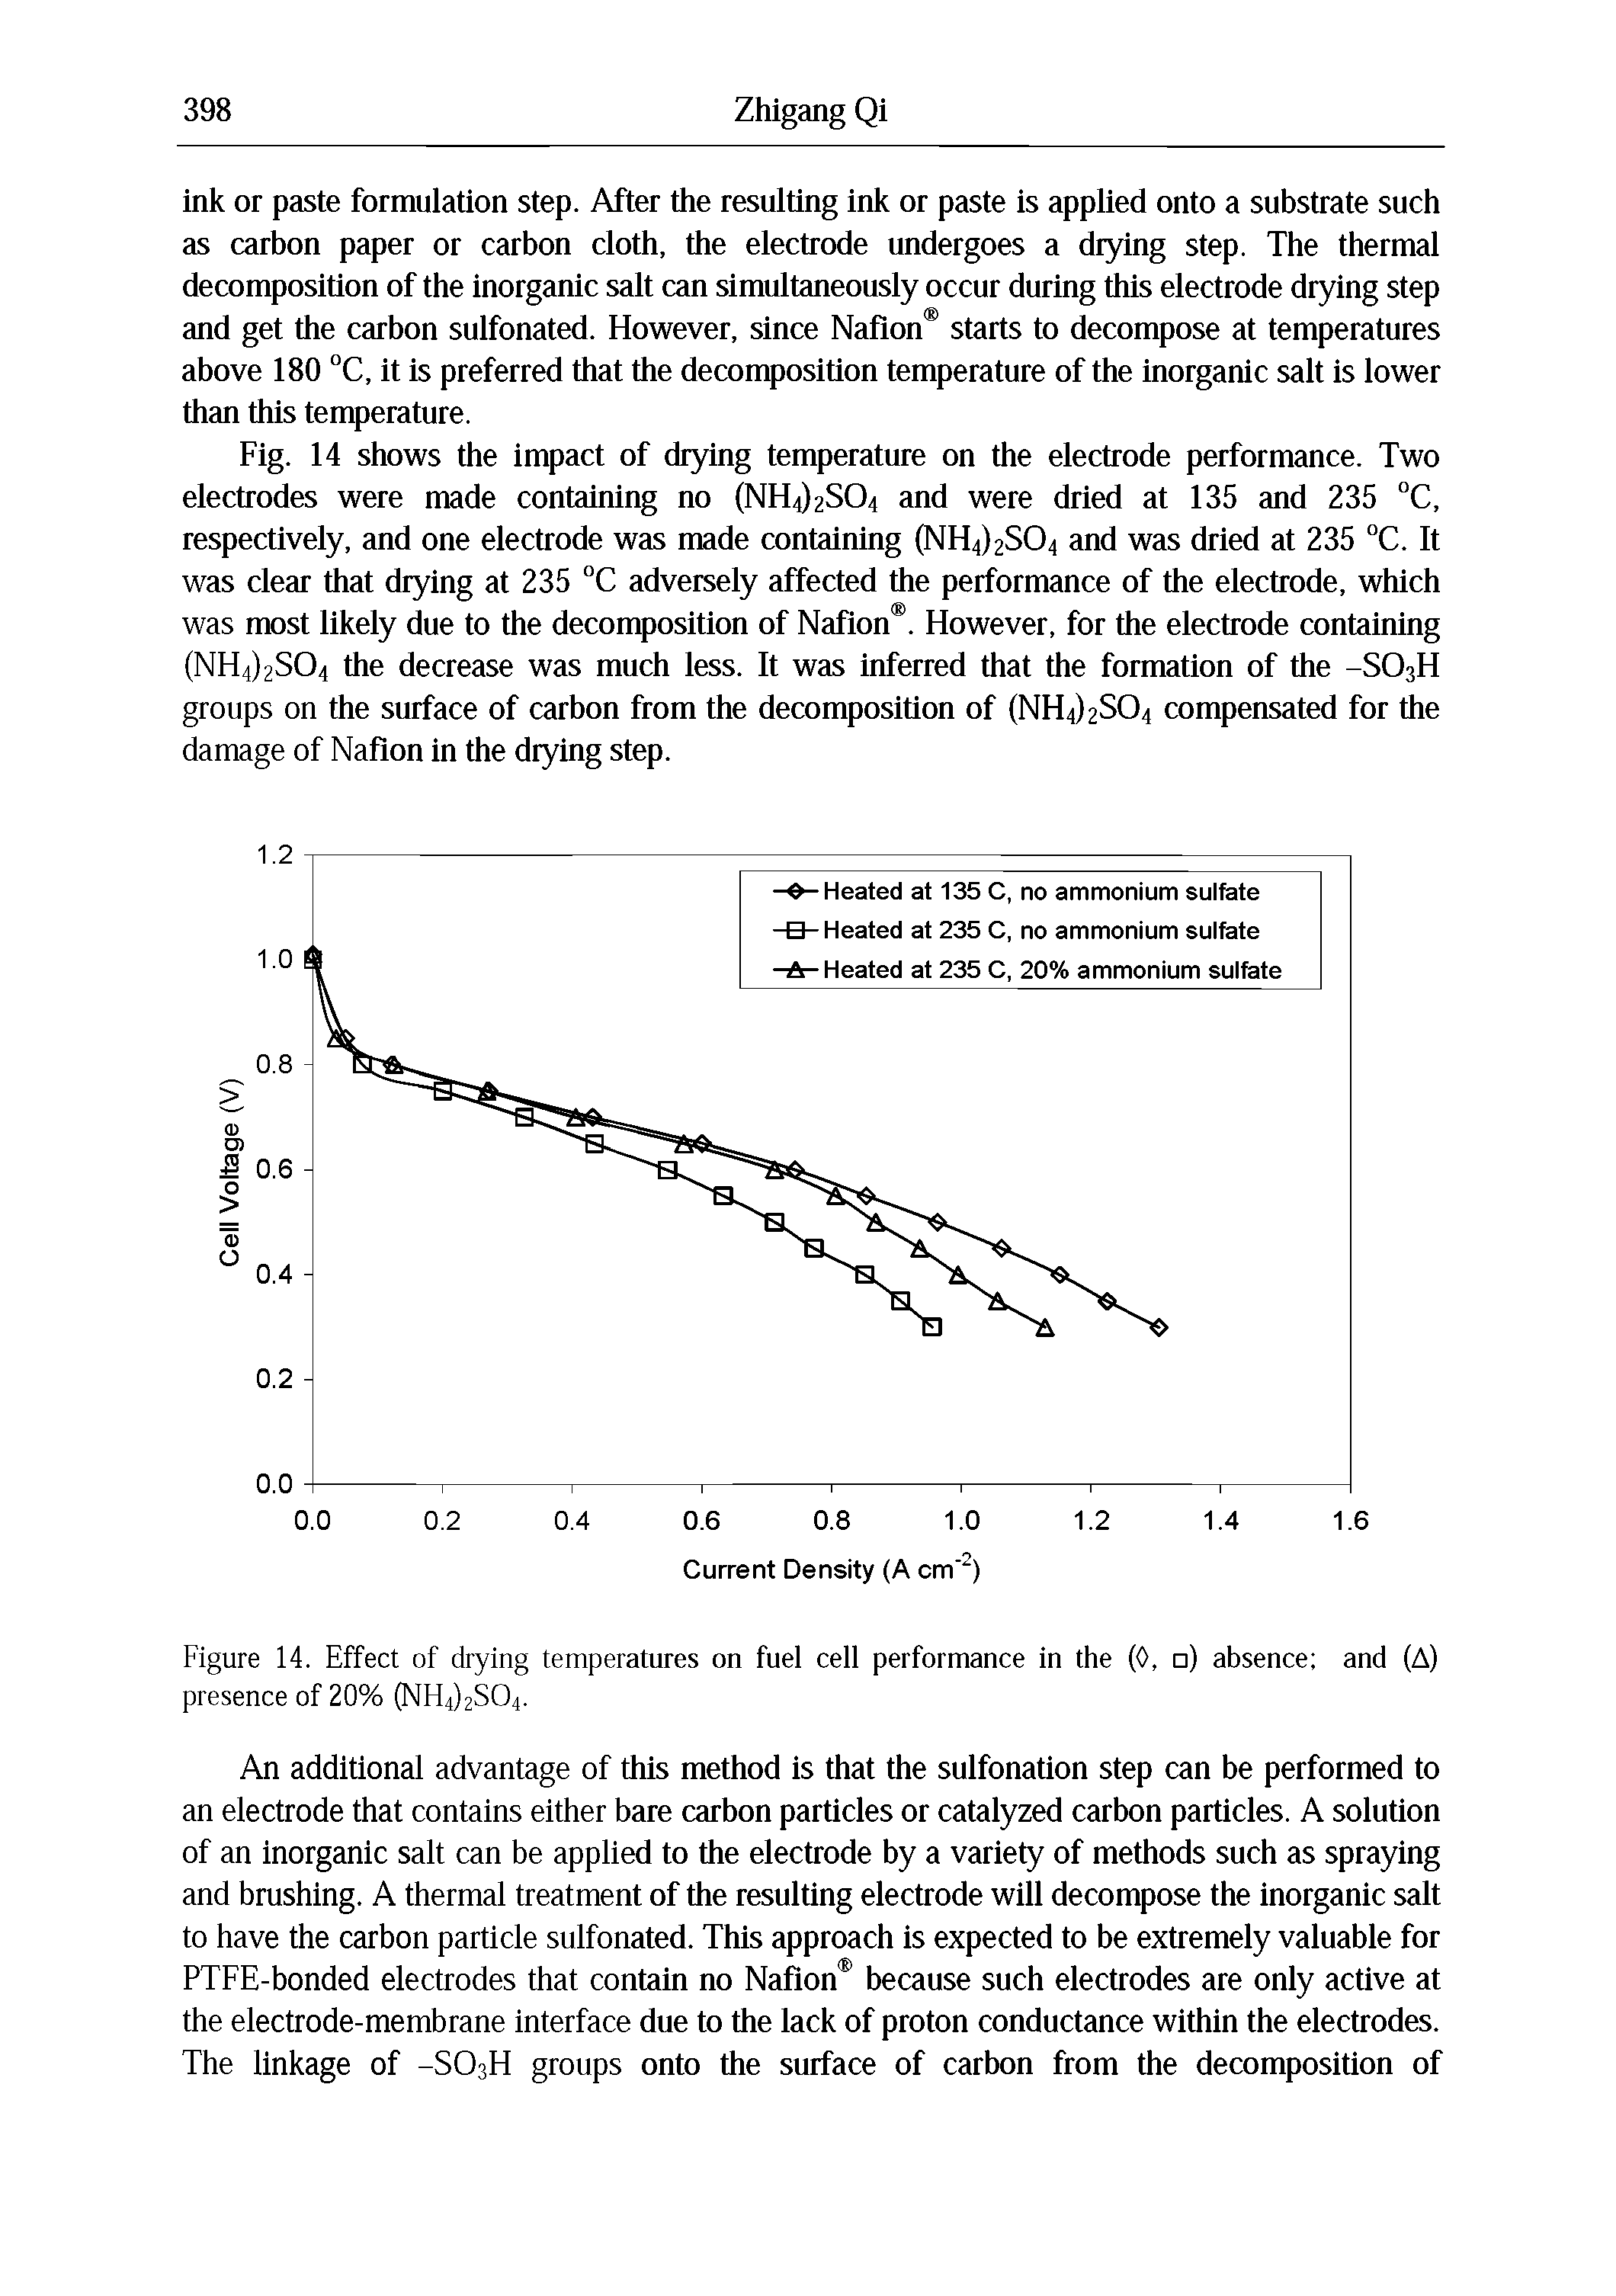 Figure 14. Effect of drying temperatures on fuel cell performance in the (0, ) absence and (A) presence of 20% (NH4)2S04.